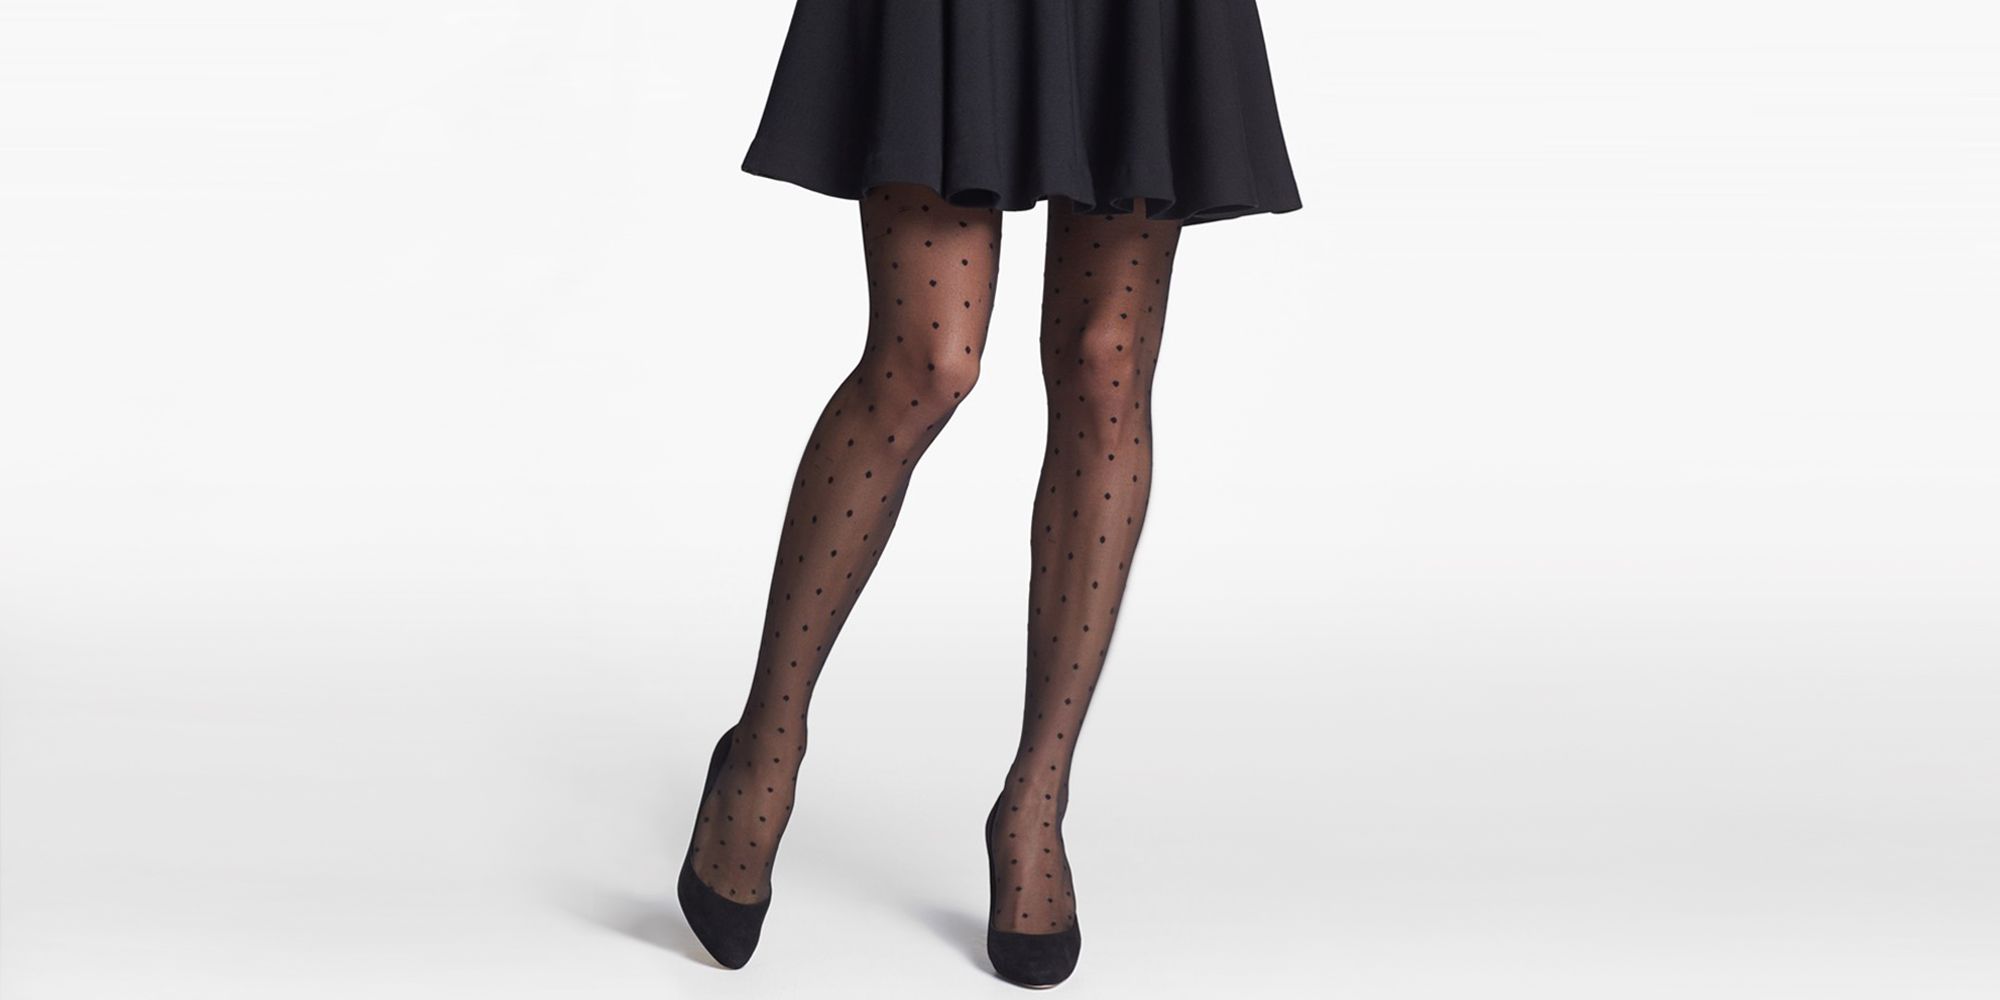 12 Best Patterned Tights for 2018 - Patterned Black Tights and Stockings